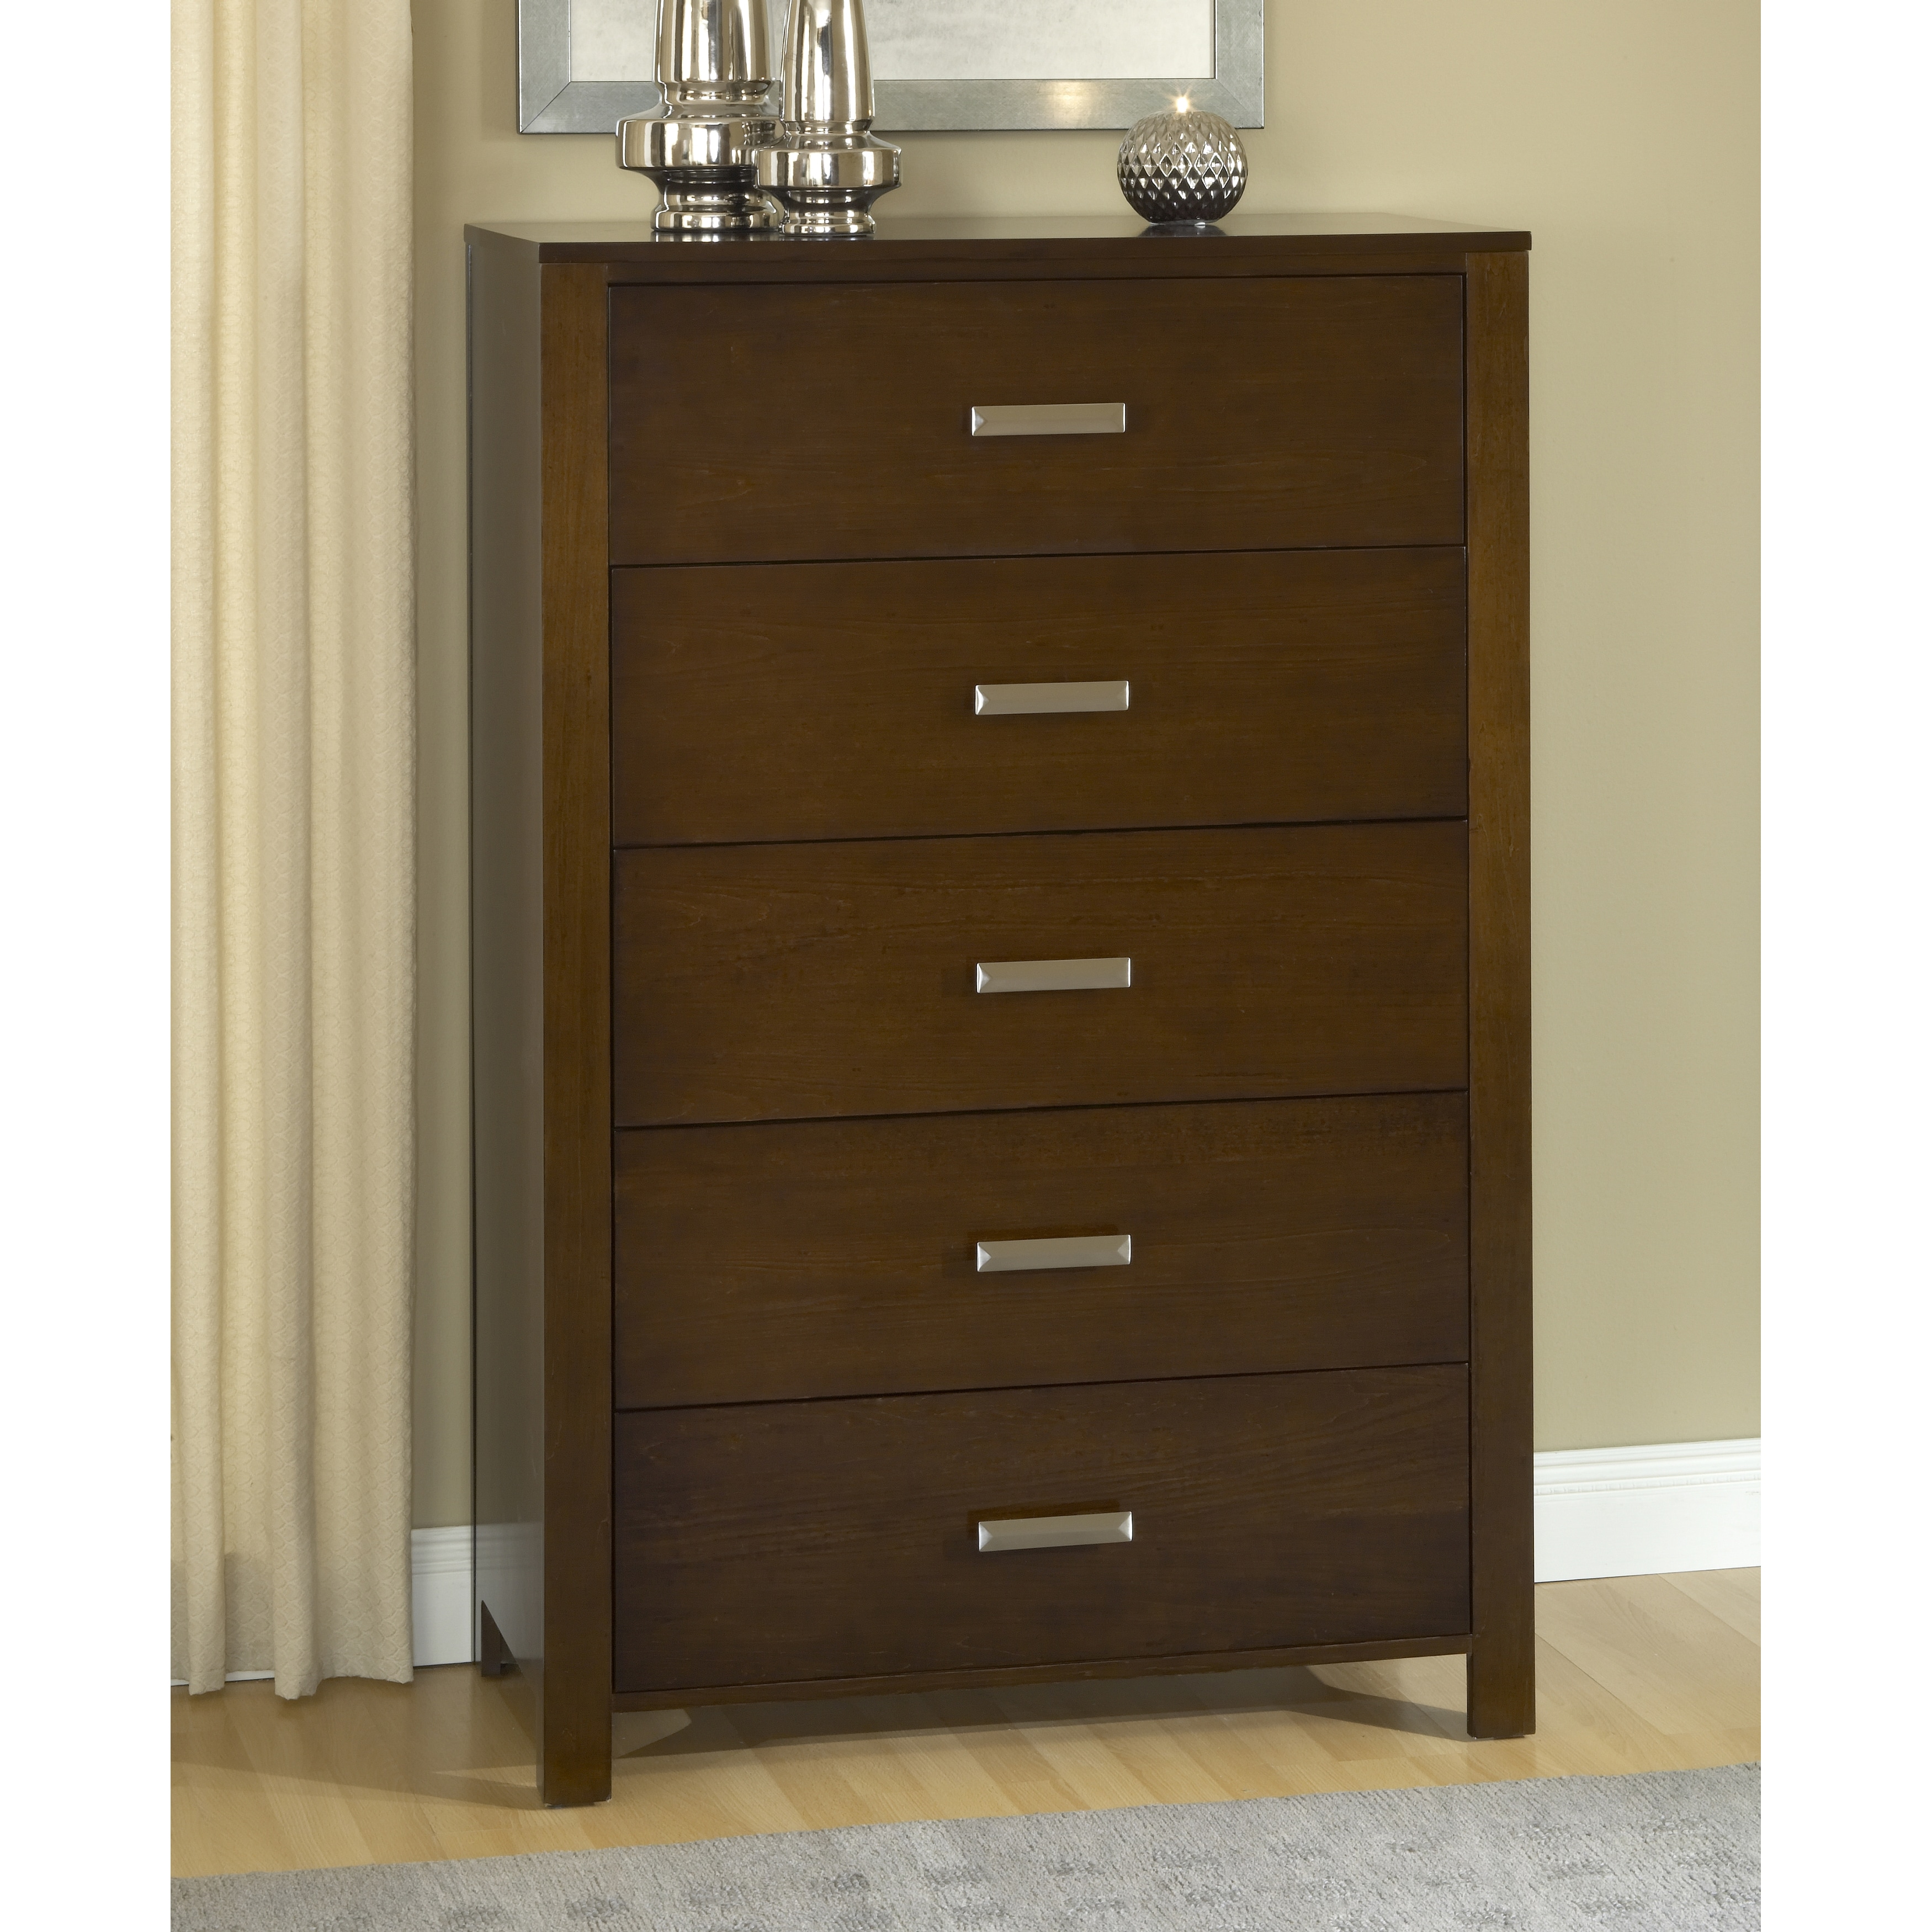 Shop Modern Chocolate Brown 5 Drawer Chest Overstock 7637403